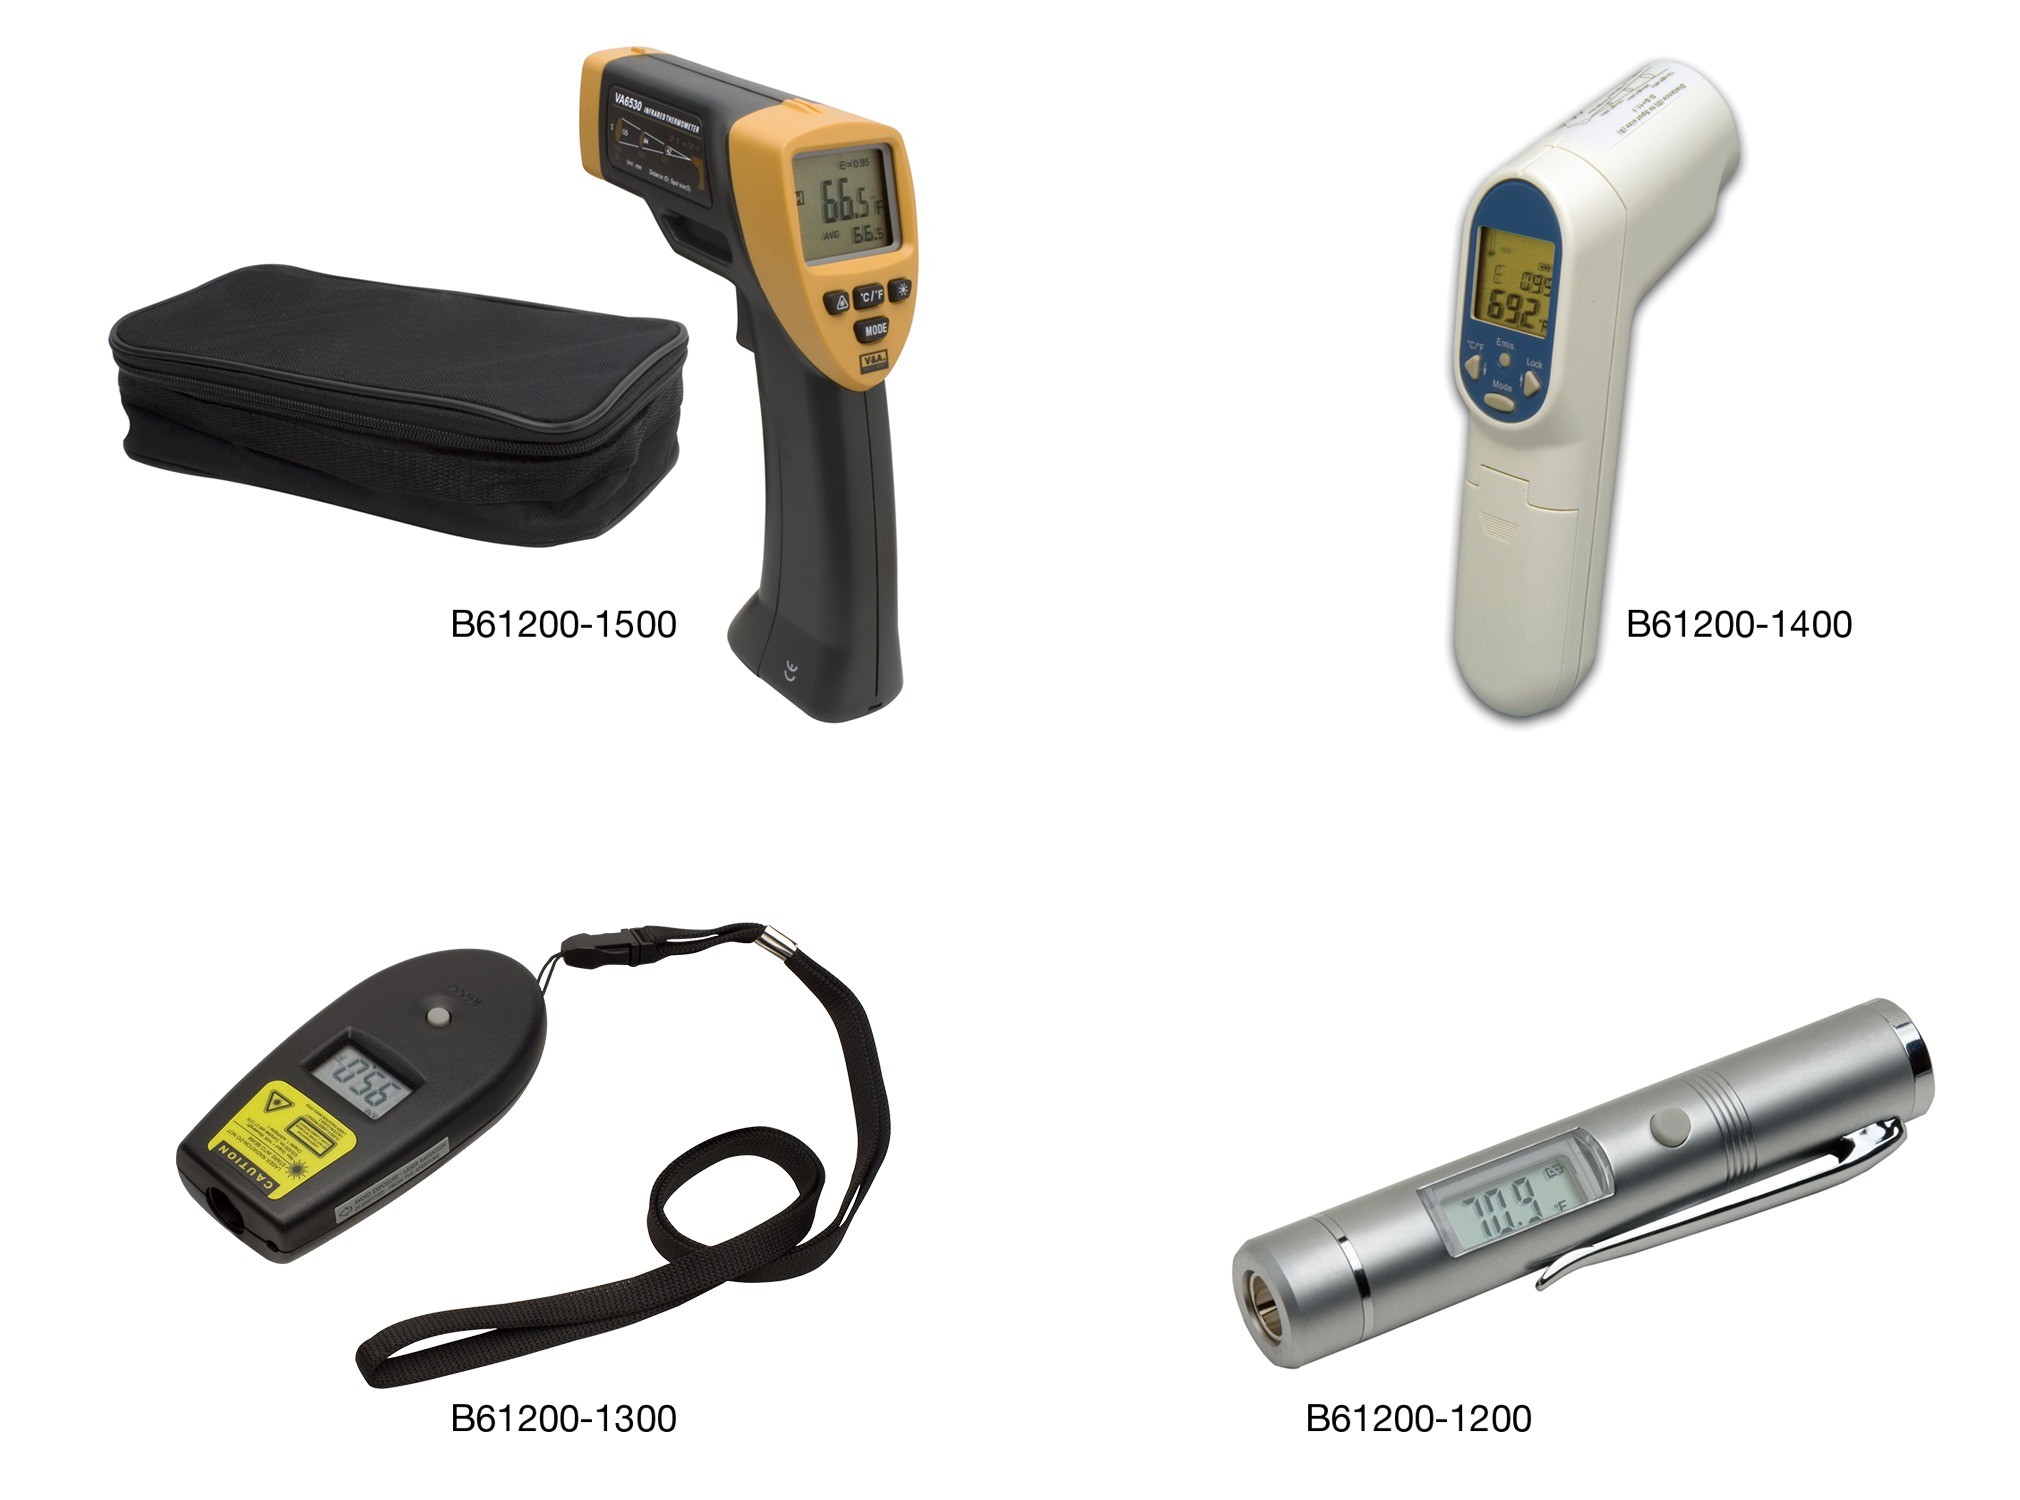 H-B DURAC Infrared Thermometers with Individual Calibration Report